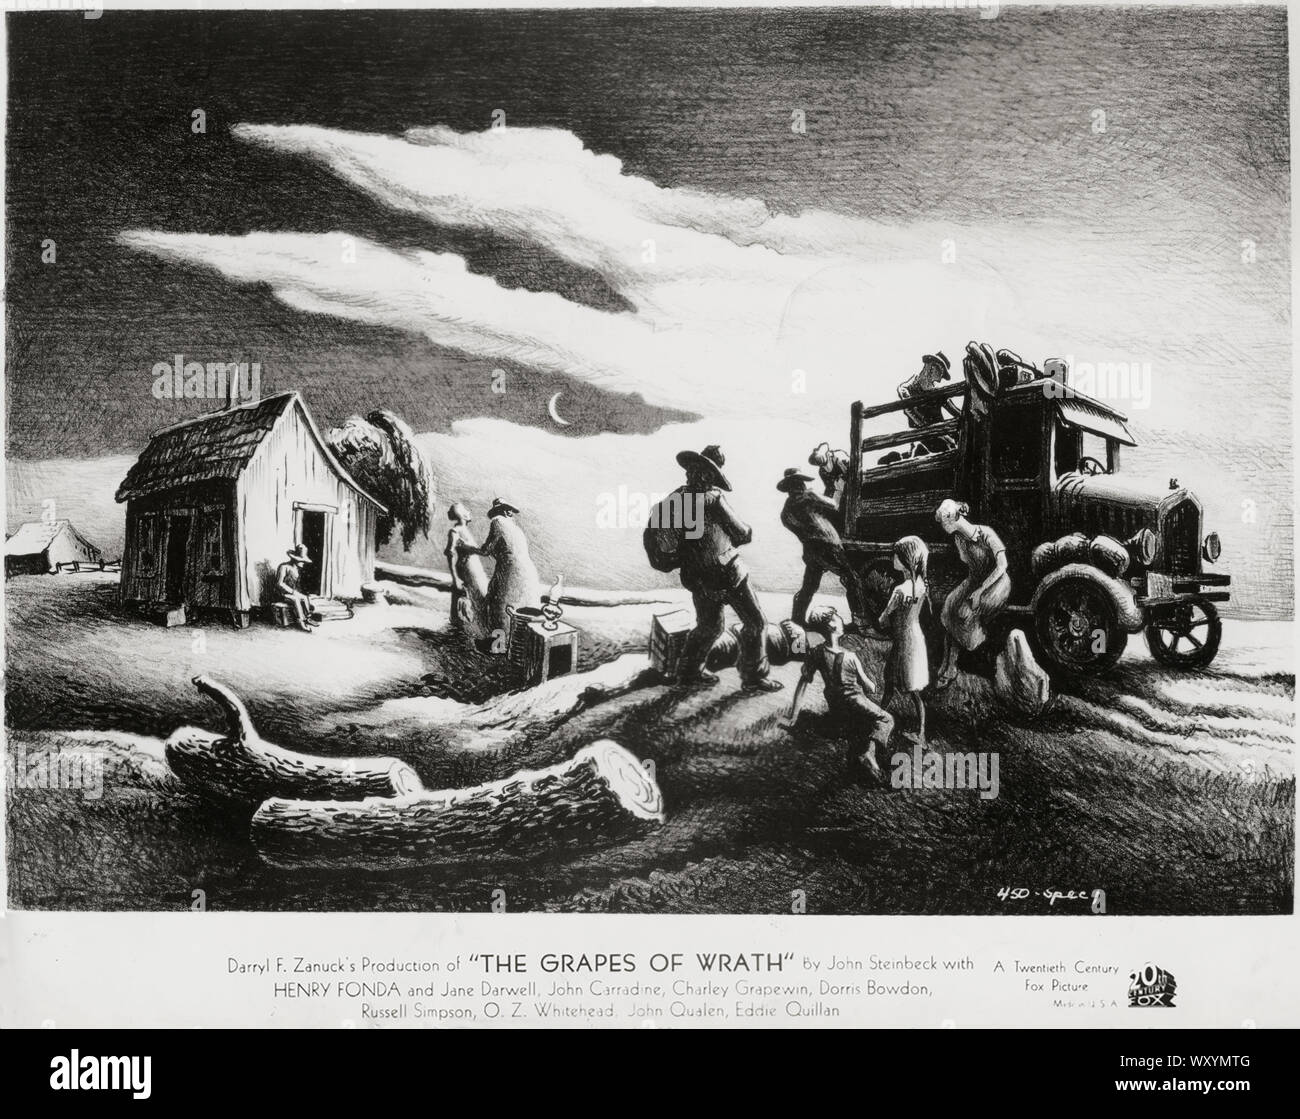 Publicity Poster for the Film, 'The Grapes of Wrath', Illustration by Thomas Hart Benton, 20th Century-Fox, 1940 Stock Photo